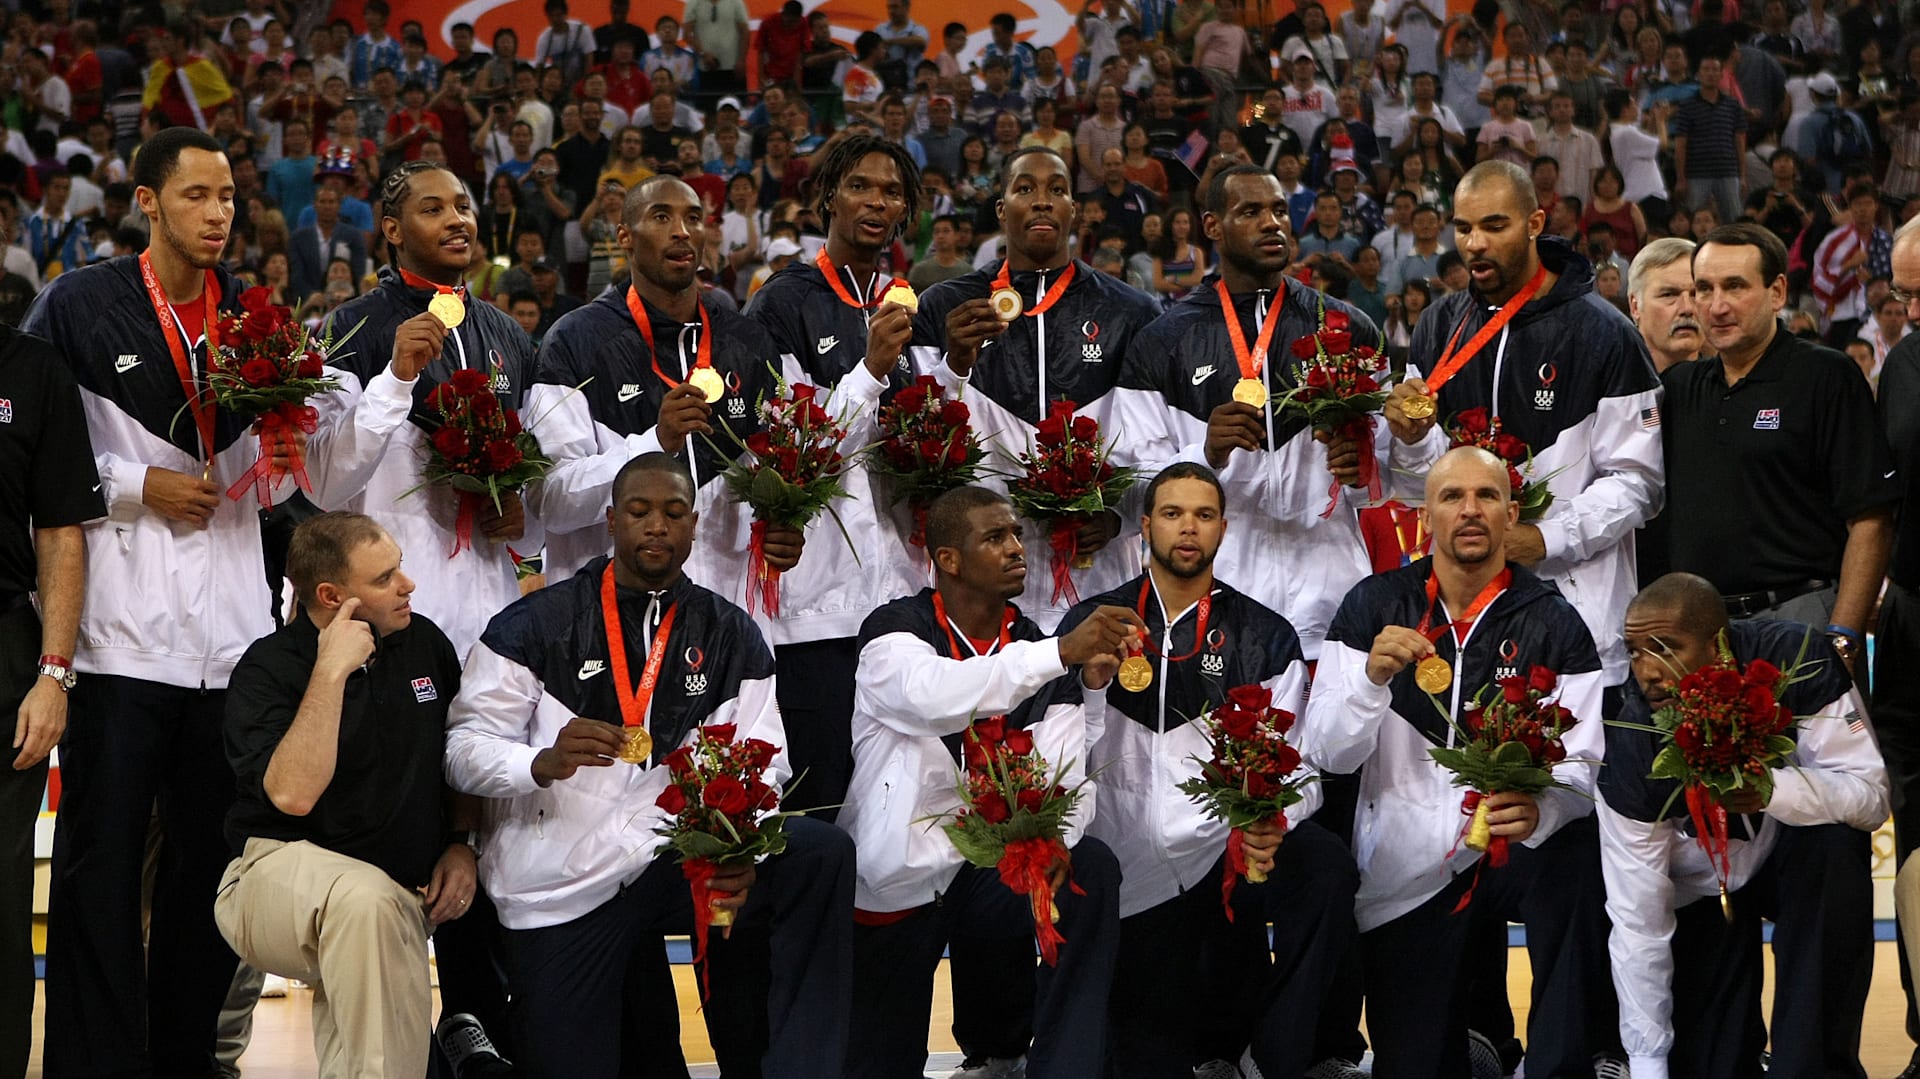 Kobe Bryant Claimed The 2012 USA Team Could Have Beaten The 1992